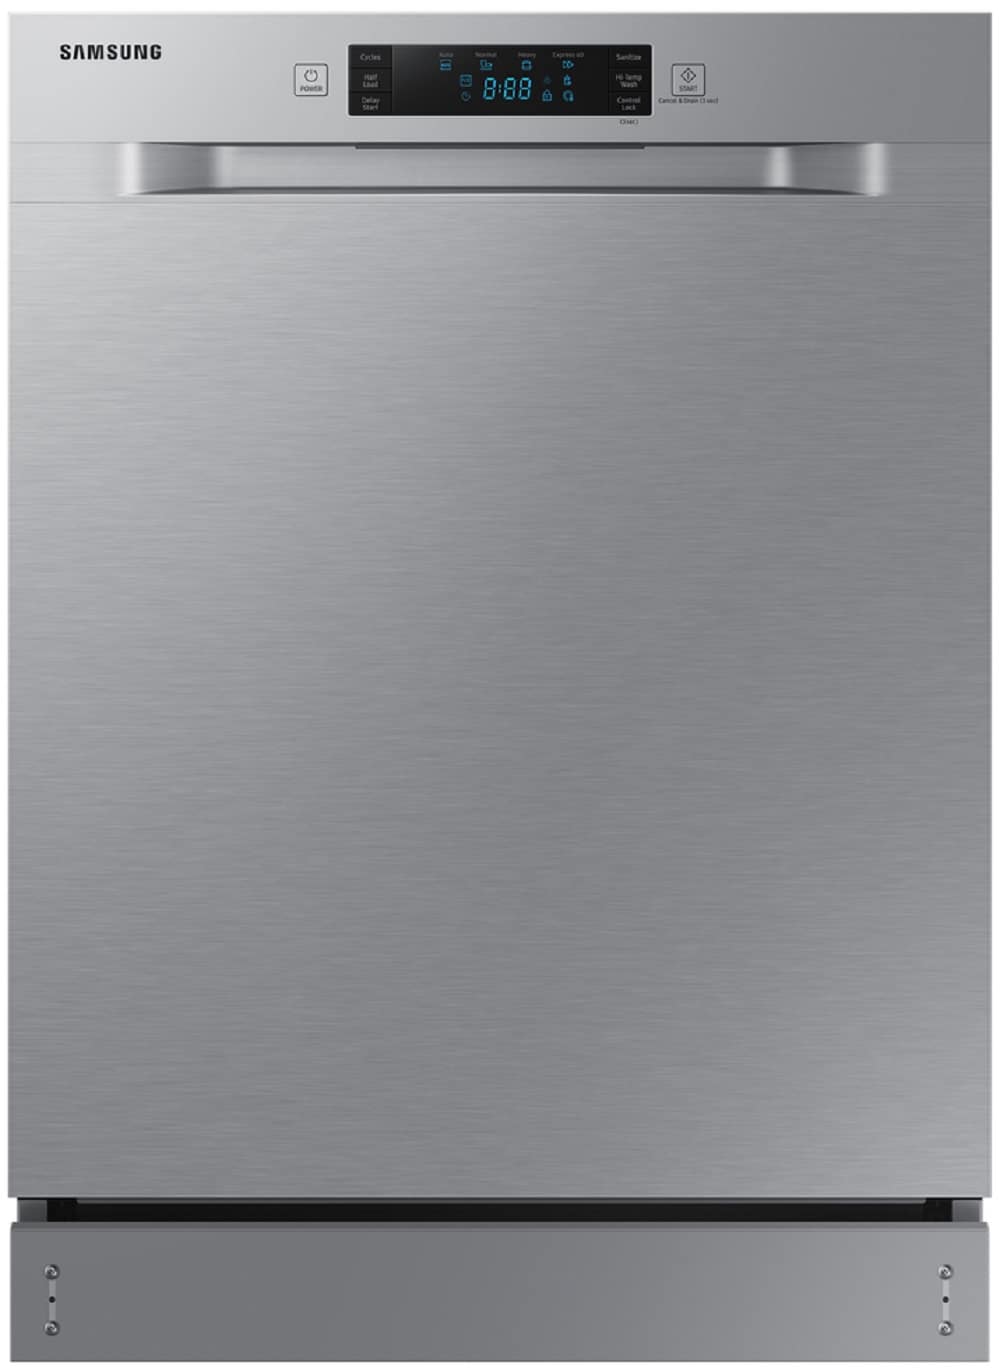 Front Control Dishwasher with Stainless Steel Interior Dishwashers -  DW80J3020US/AA